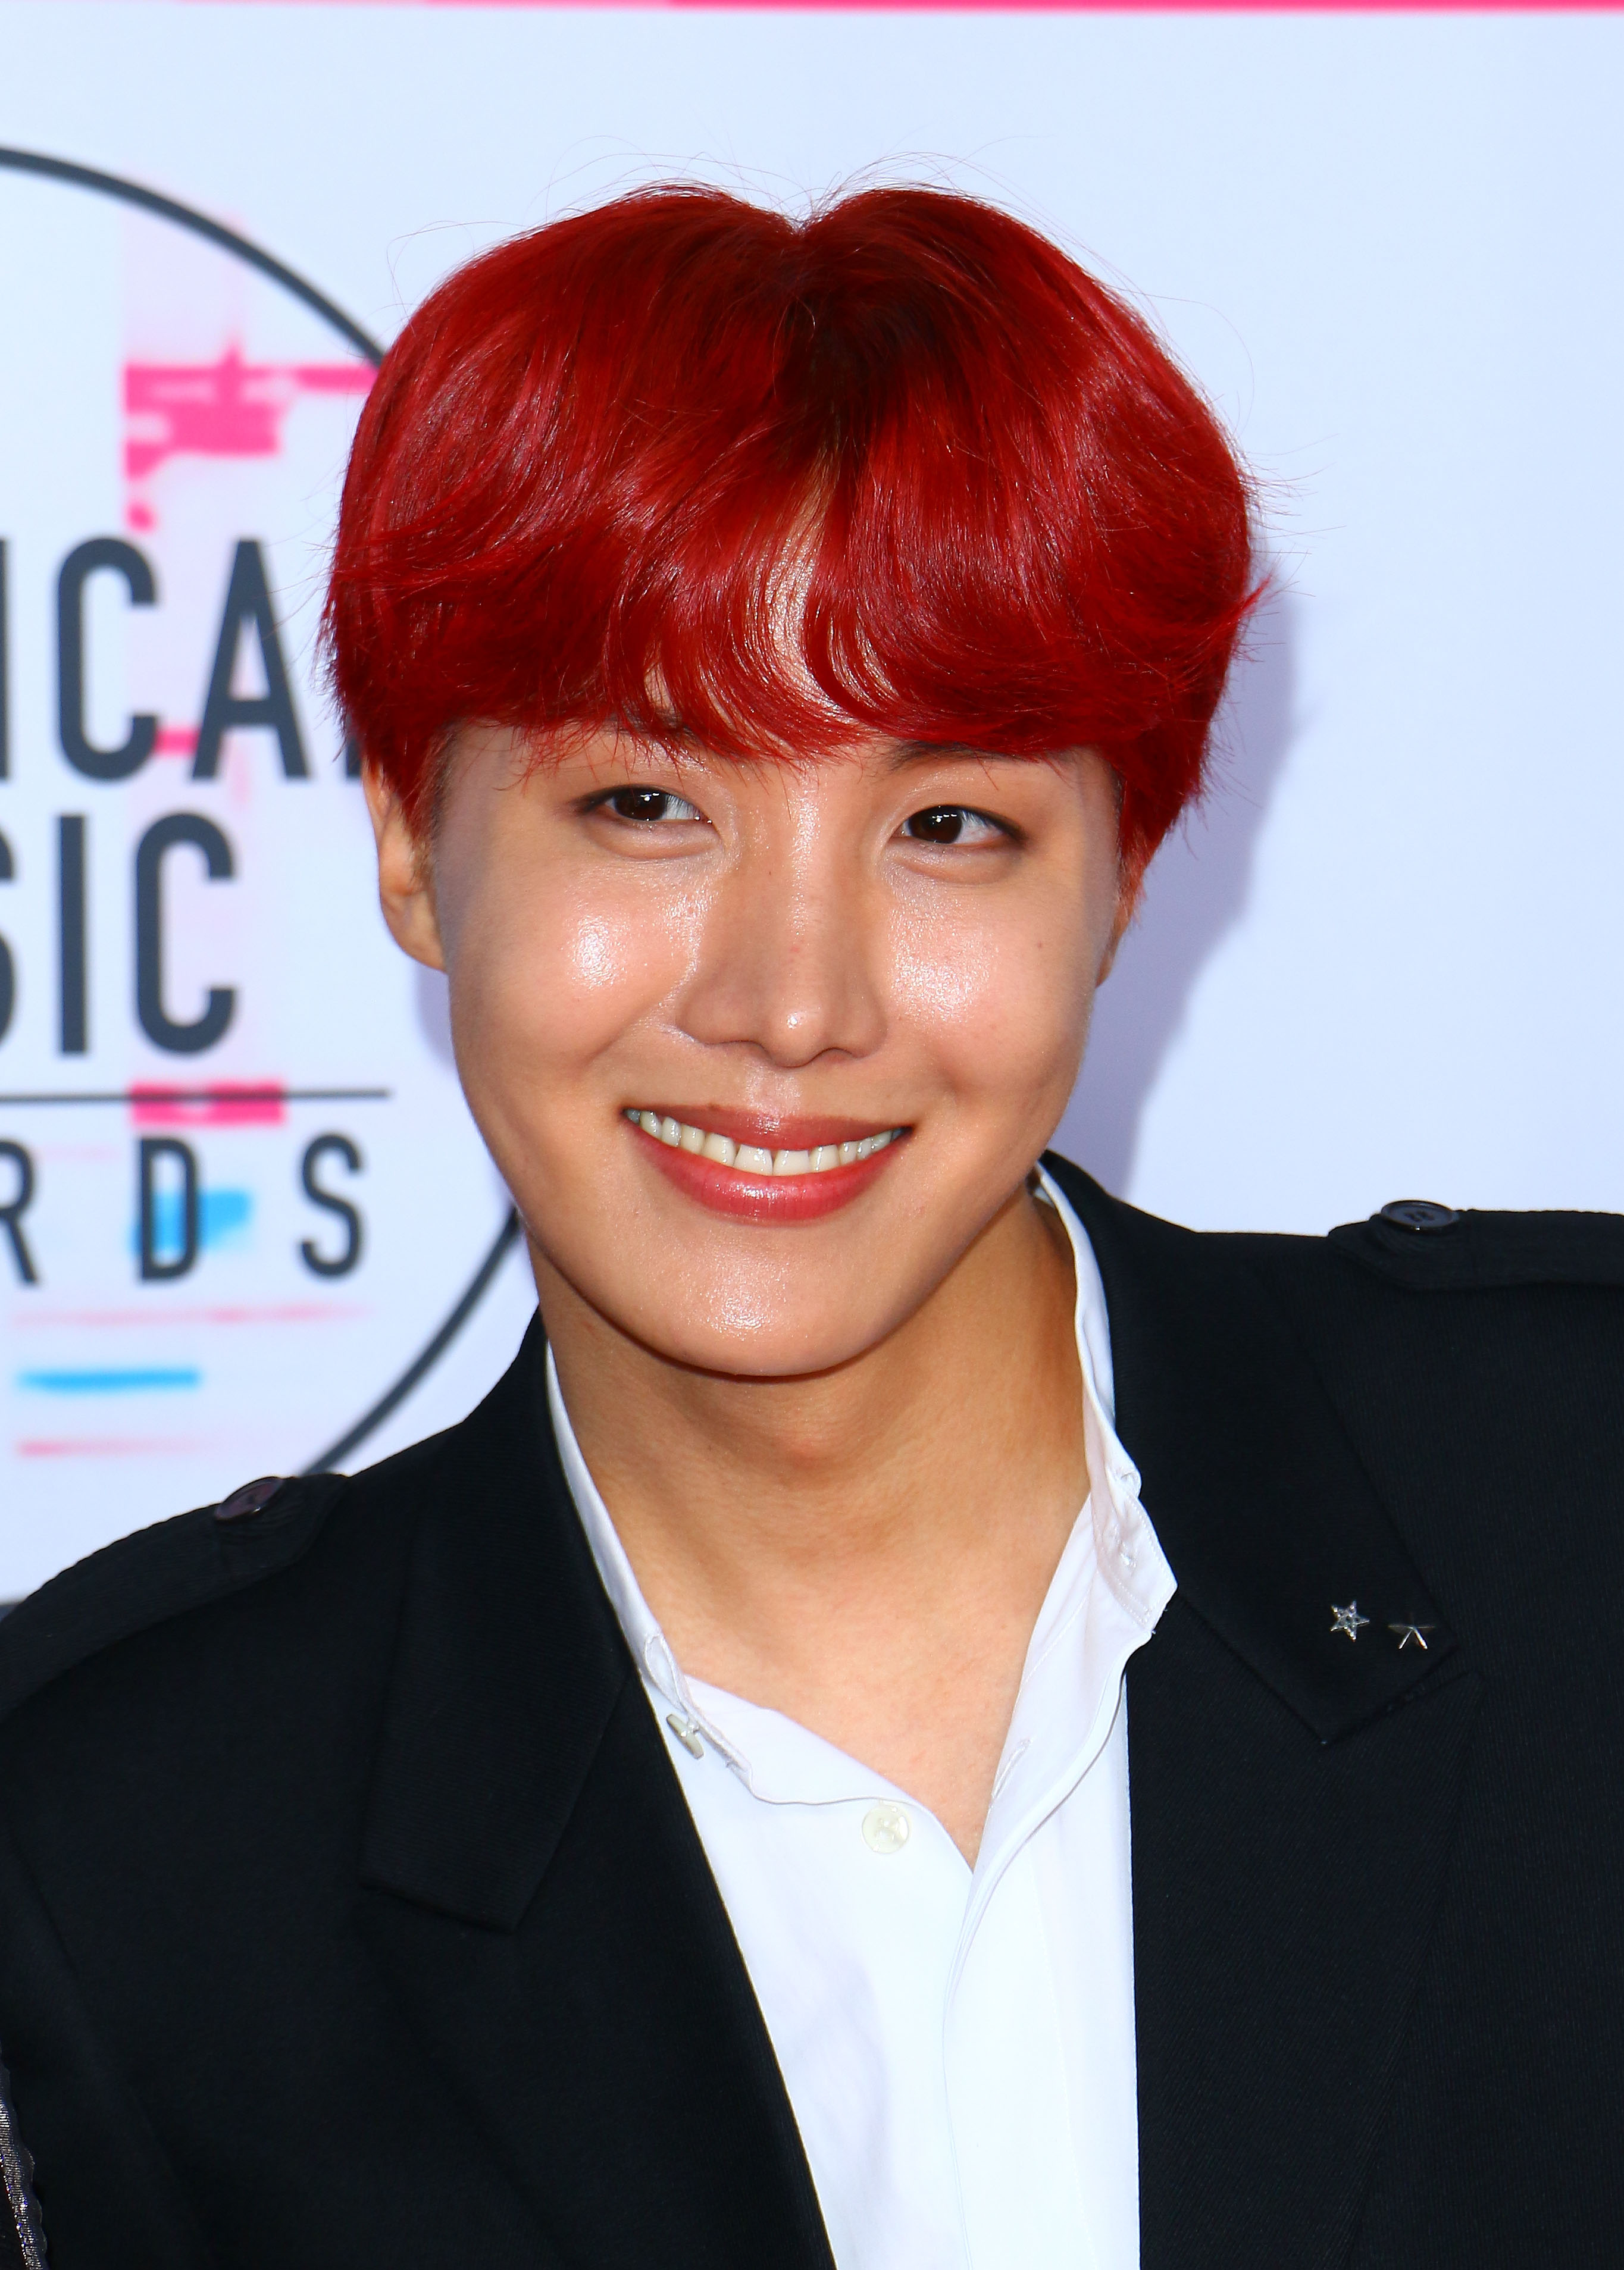 J-Hope Reveals Why BTS's Image Changed So Drastically Since Debut